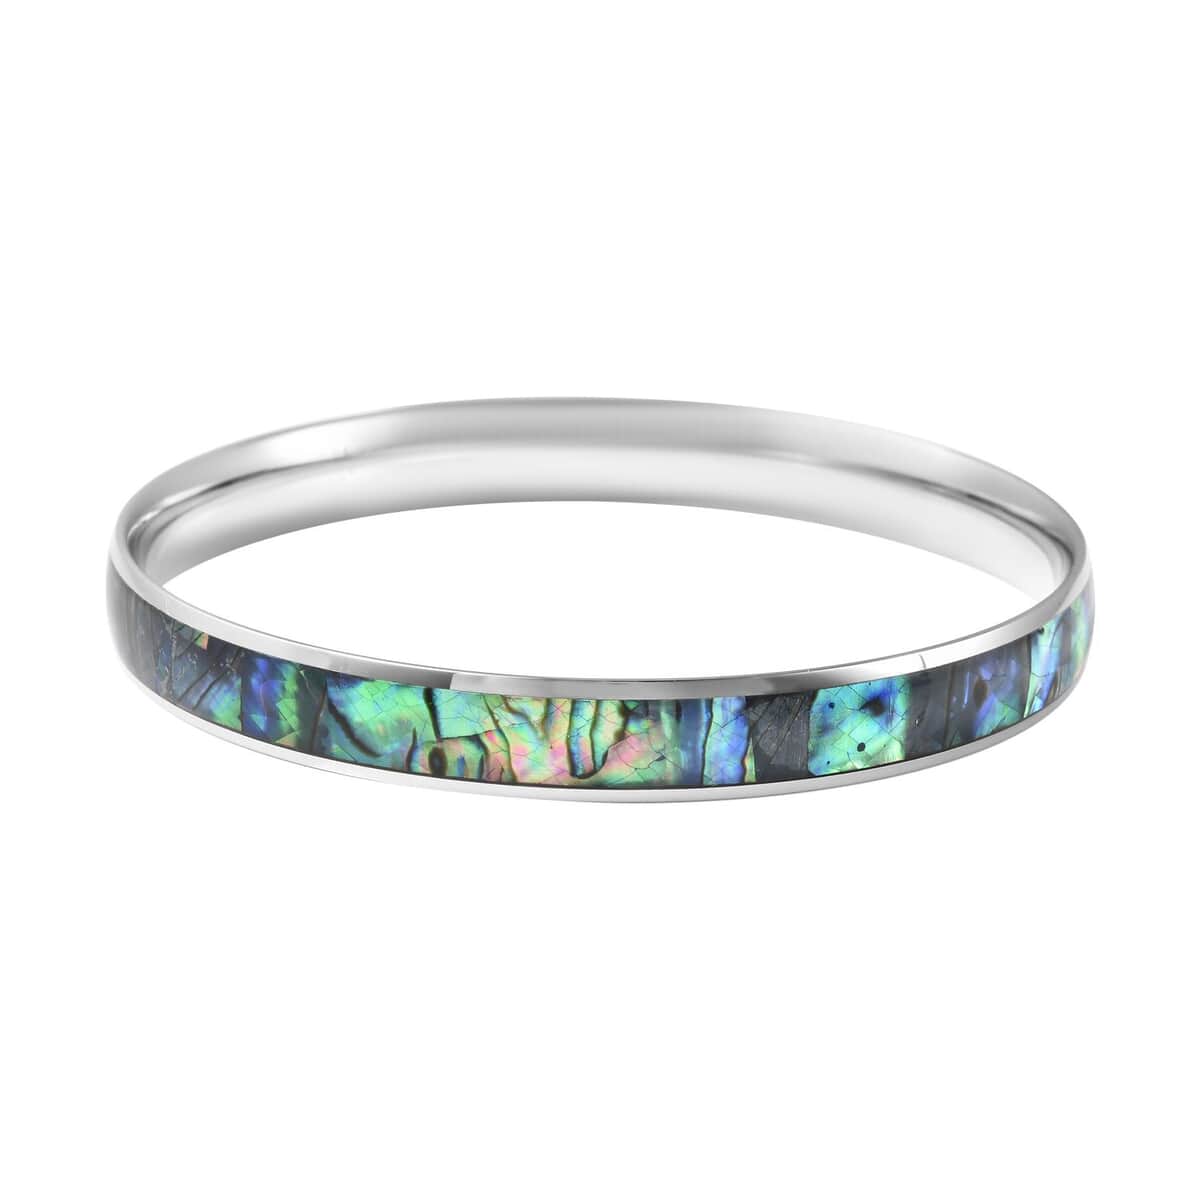 Abalone Shell Bangle Bracelet in Stainless Steel, Enamel Bracelet, Fashion Beach Jewelry For Women, Gift For Her (6.50 In) image number 3